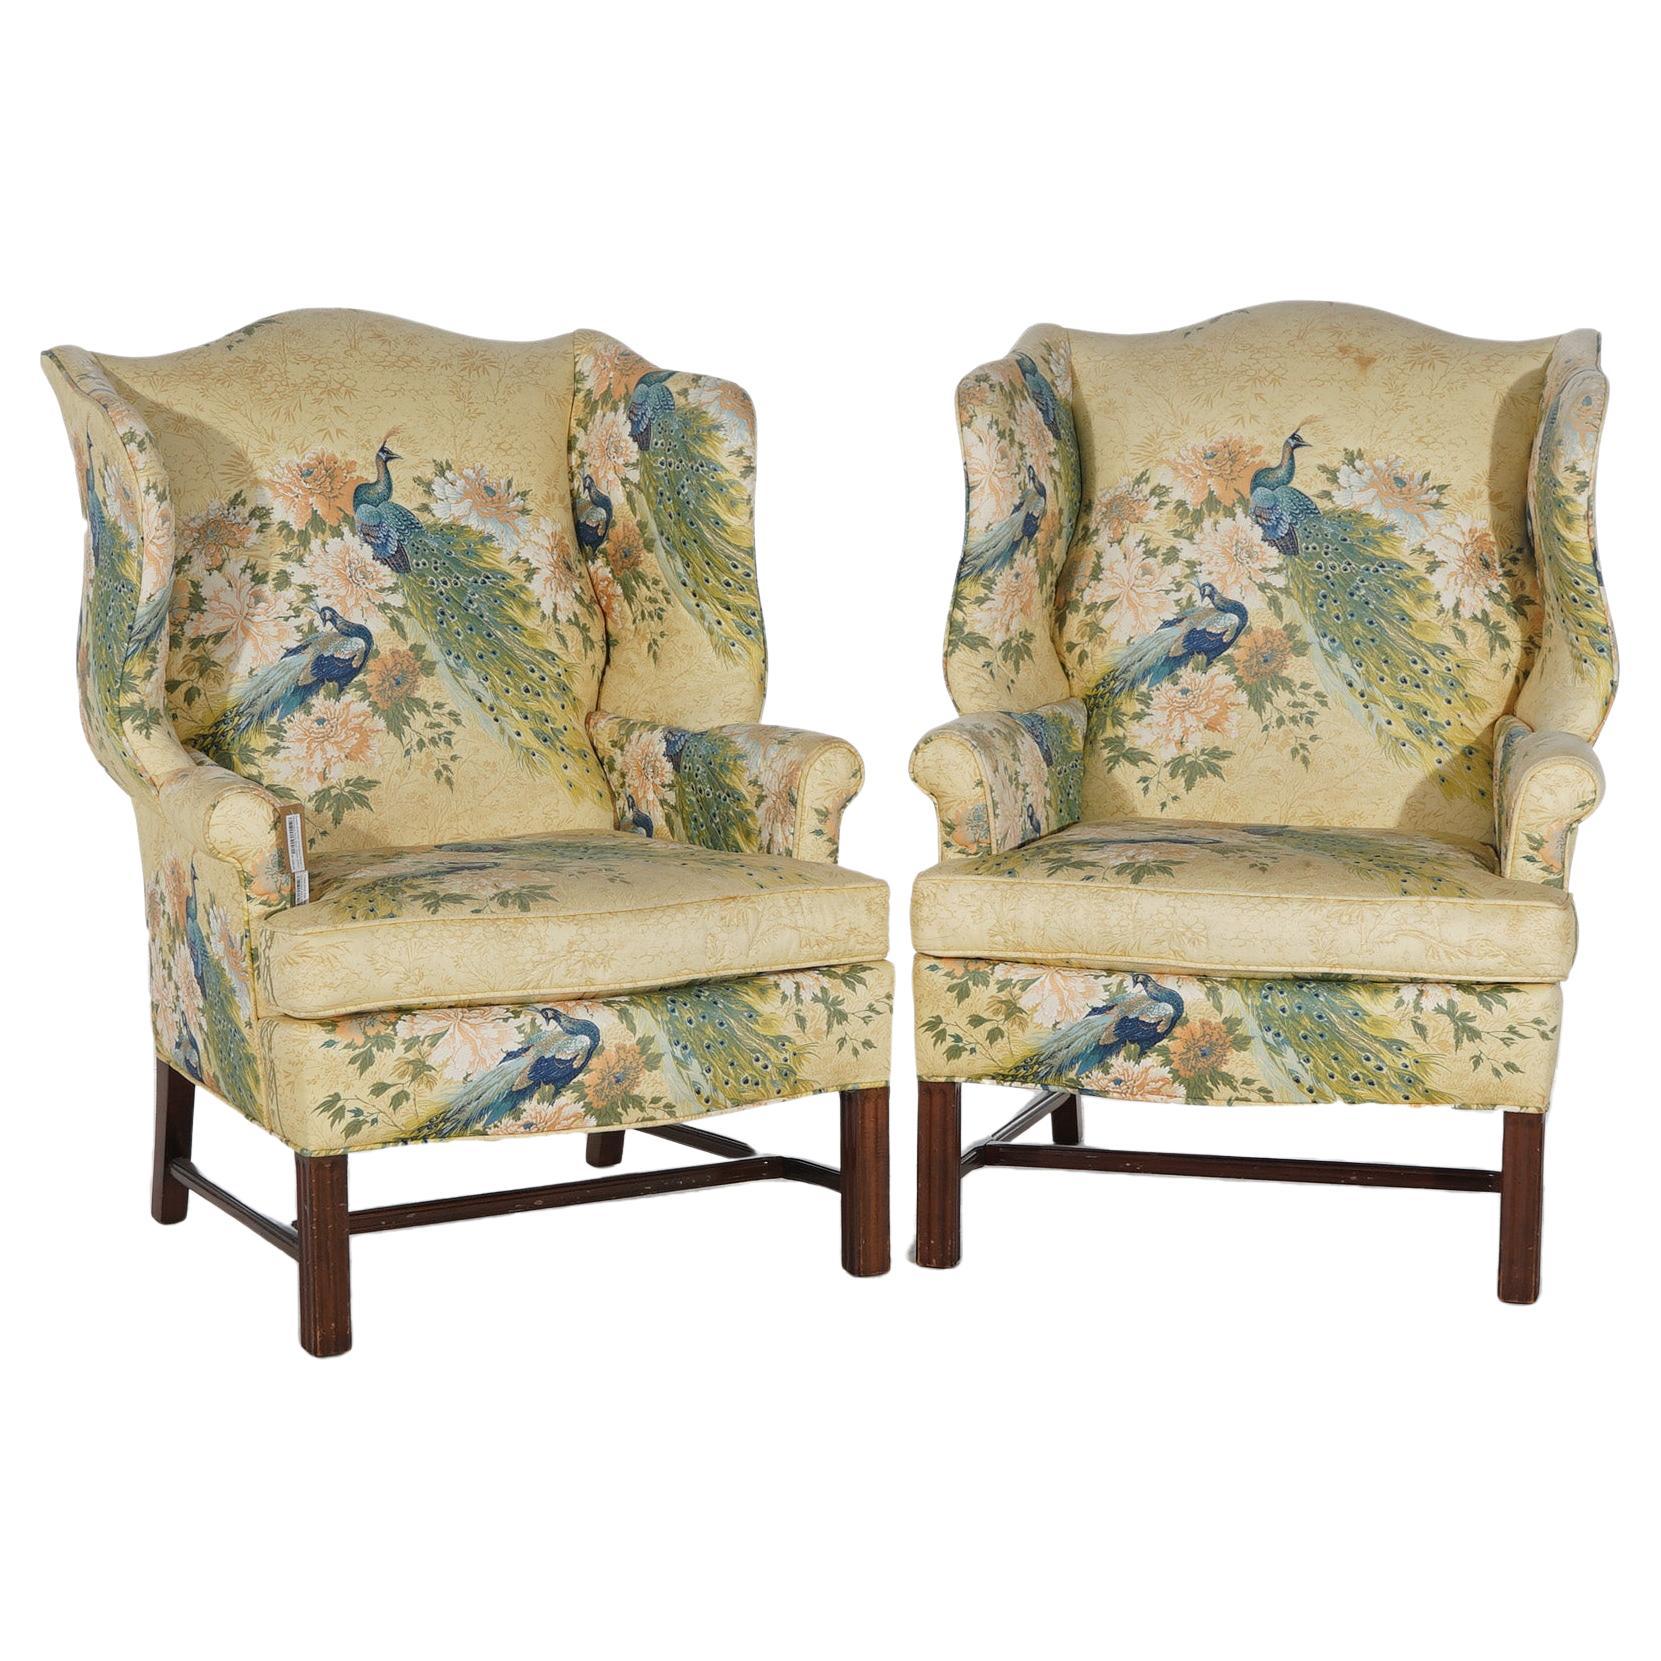 Pair of English Colonial Peacock & Floral Decorated Wing Back Chairs 20thC